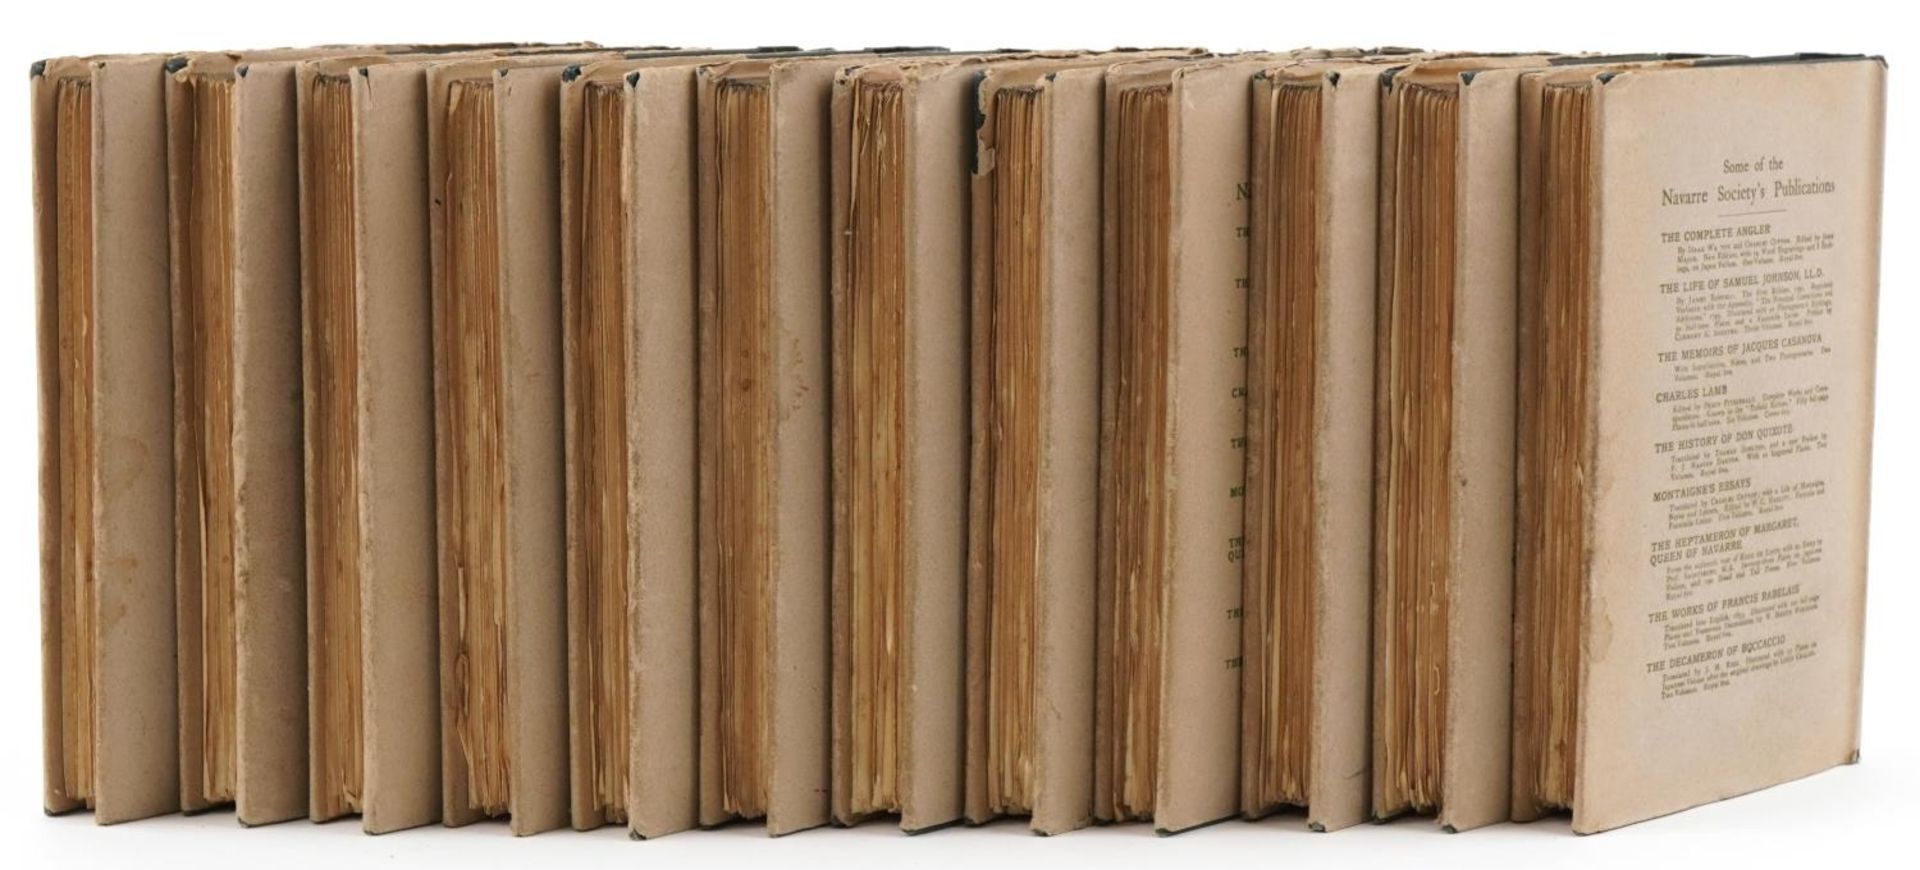 The Works of Henry Fielding, set of twelve Navarre Society hardback books with dust jackets - Image 9 of 10